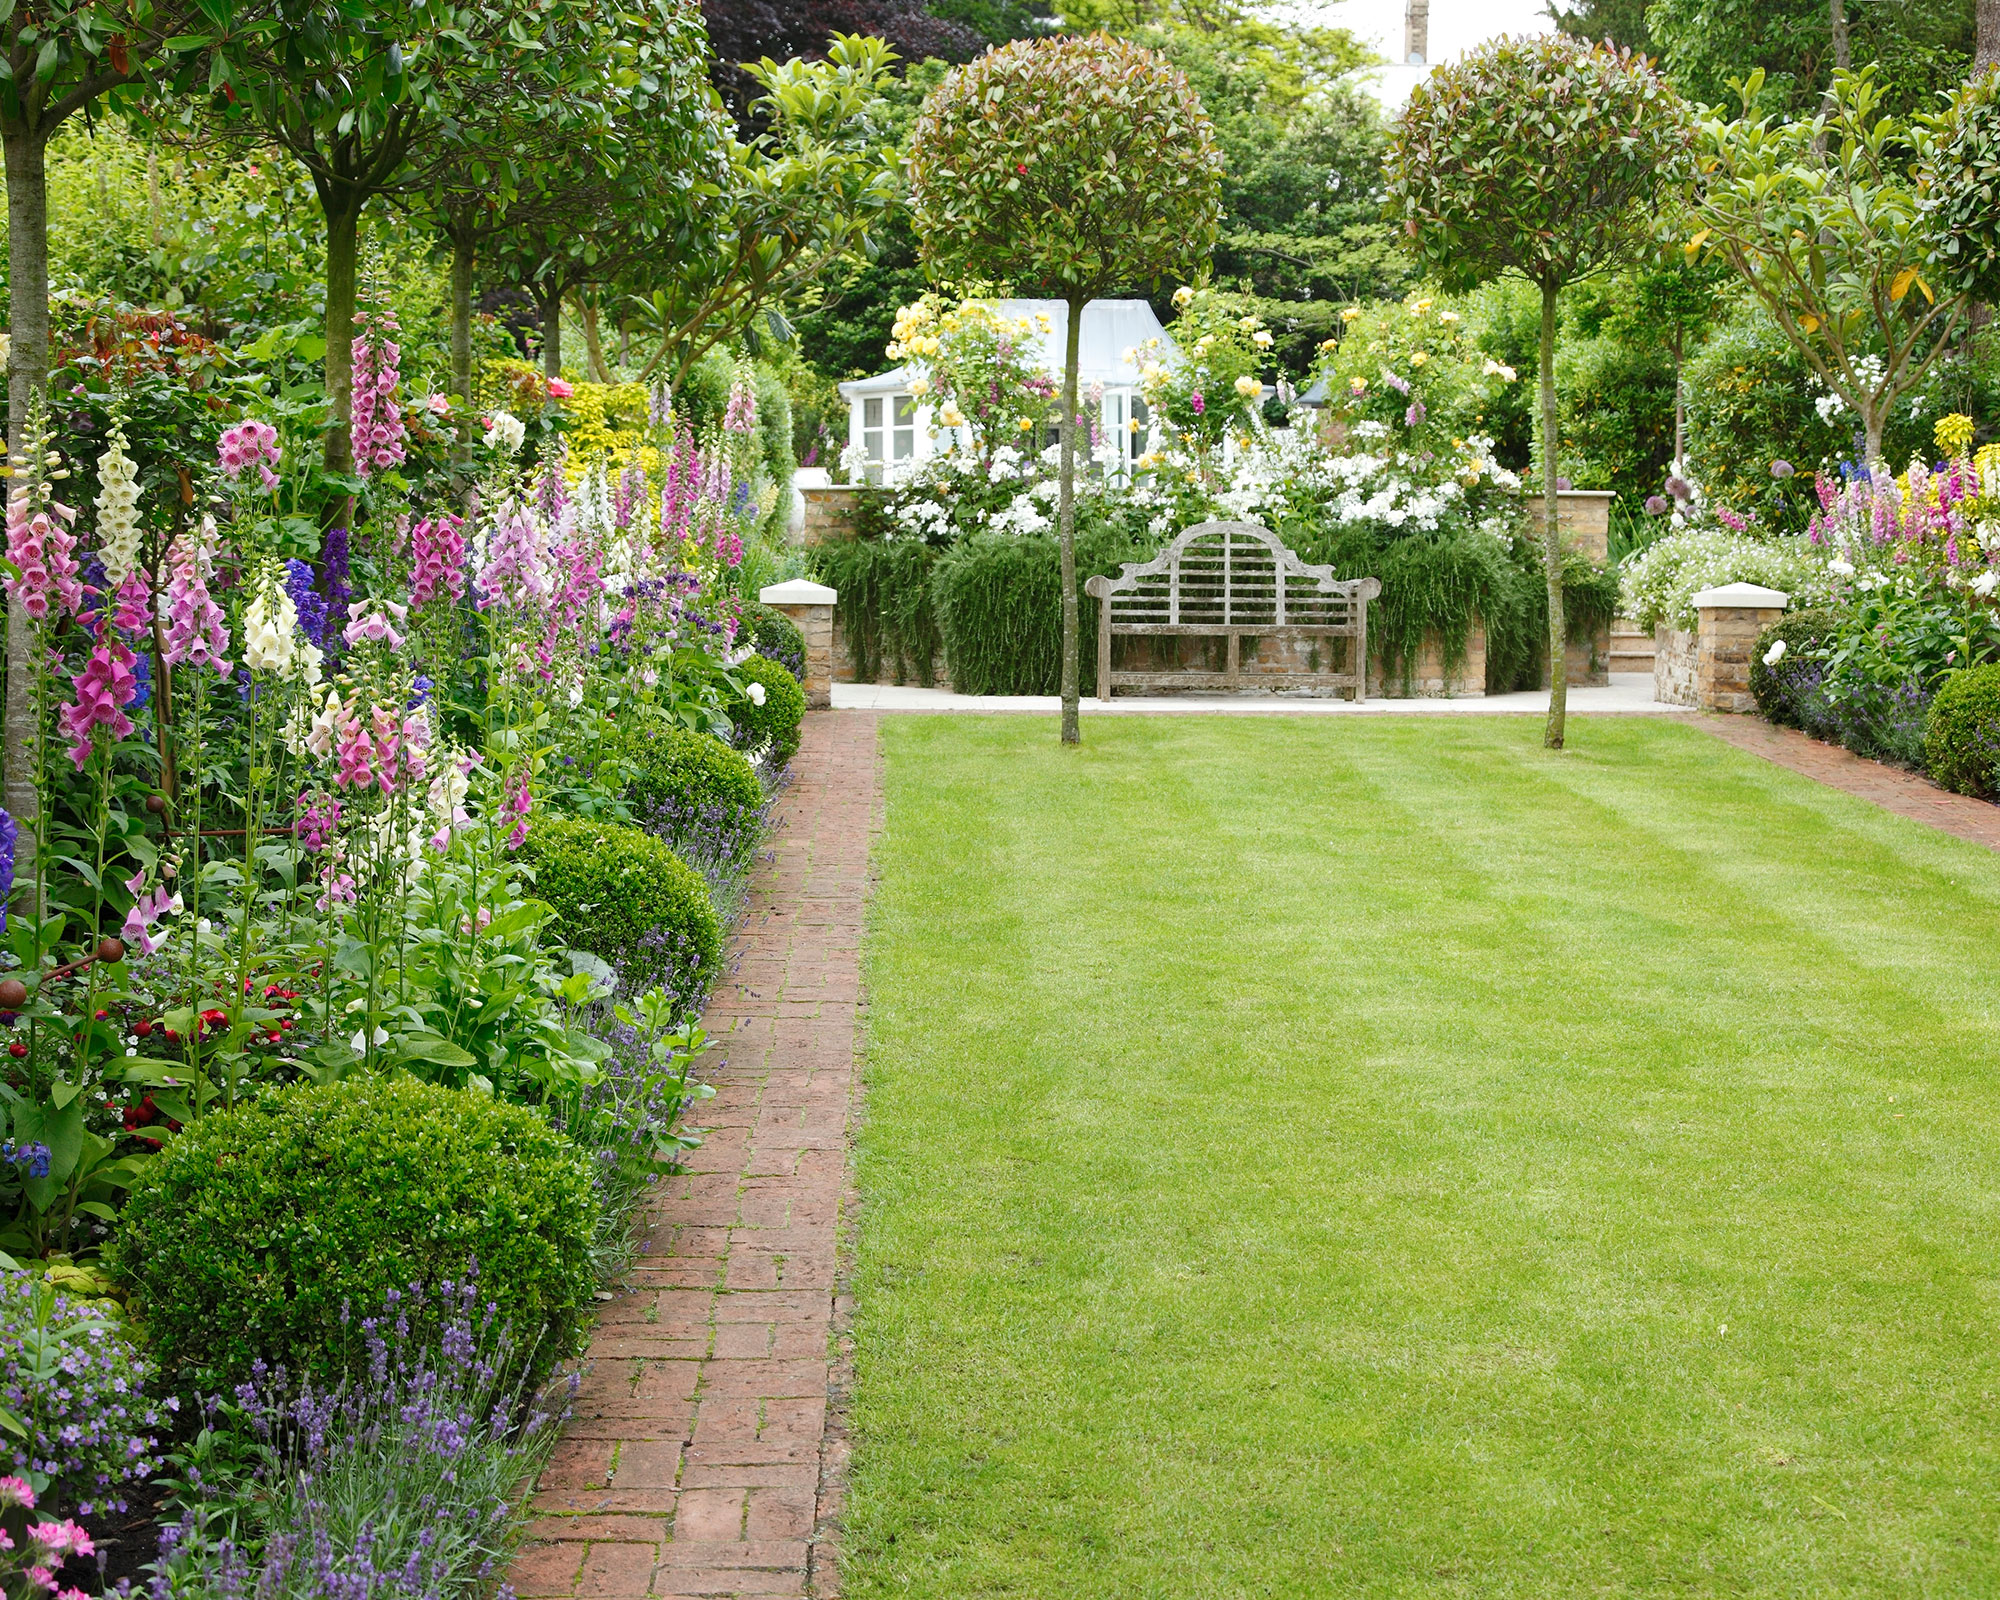 Gardening and landscaping services